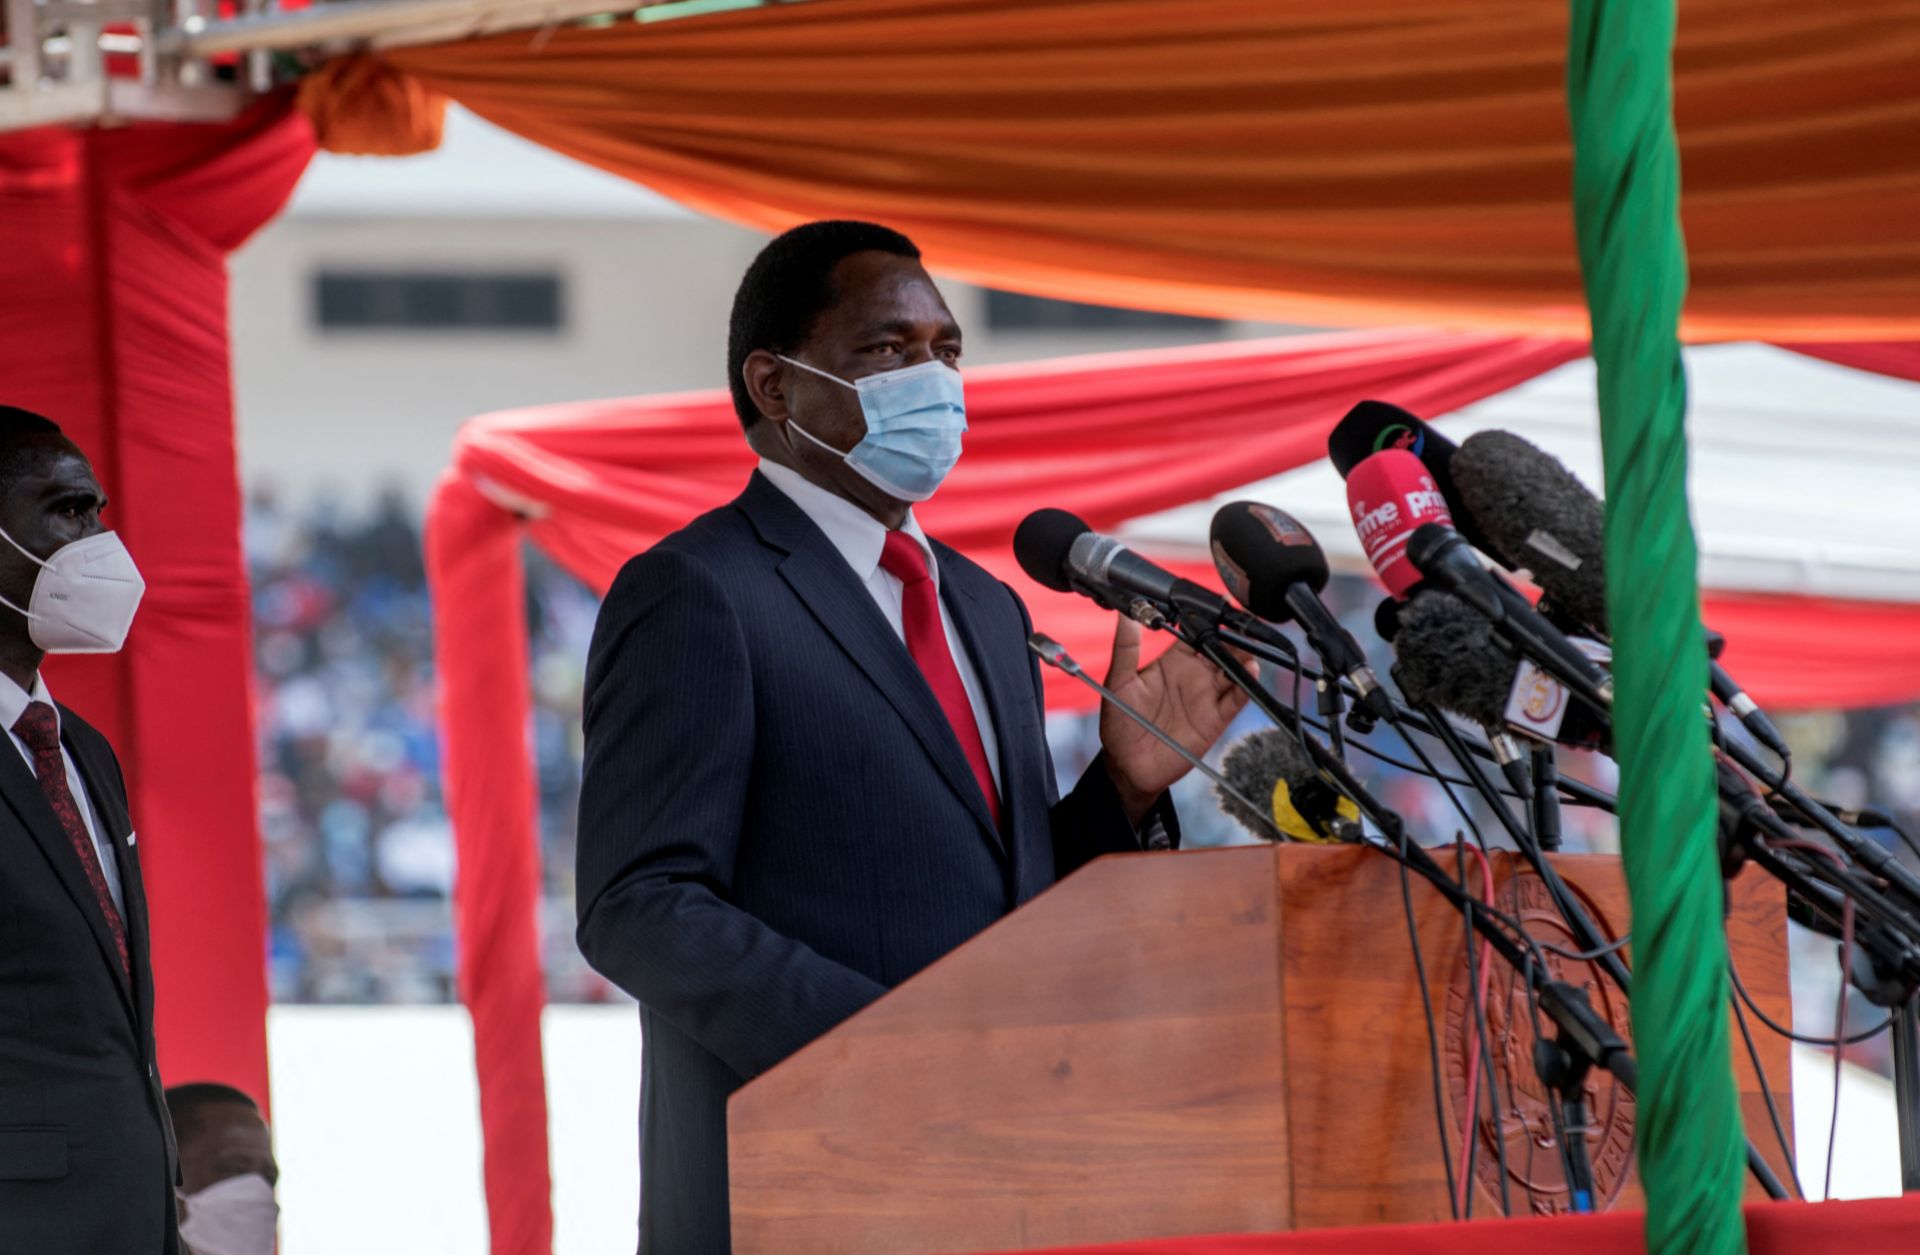 Newly elected Zambian President Hakainde Hichilema delivers a speech during his inauguration at the Heroes Stadium in Lusaka on Aug. 24, 2021. 